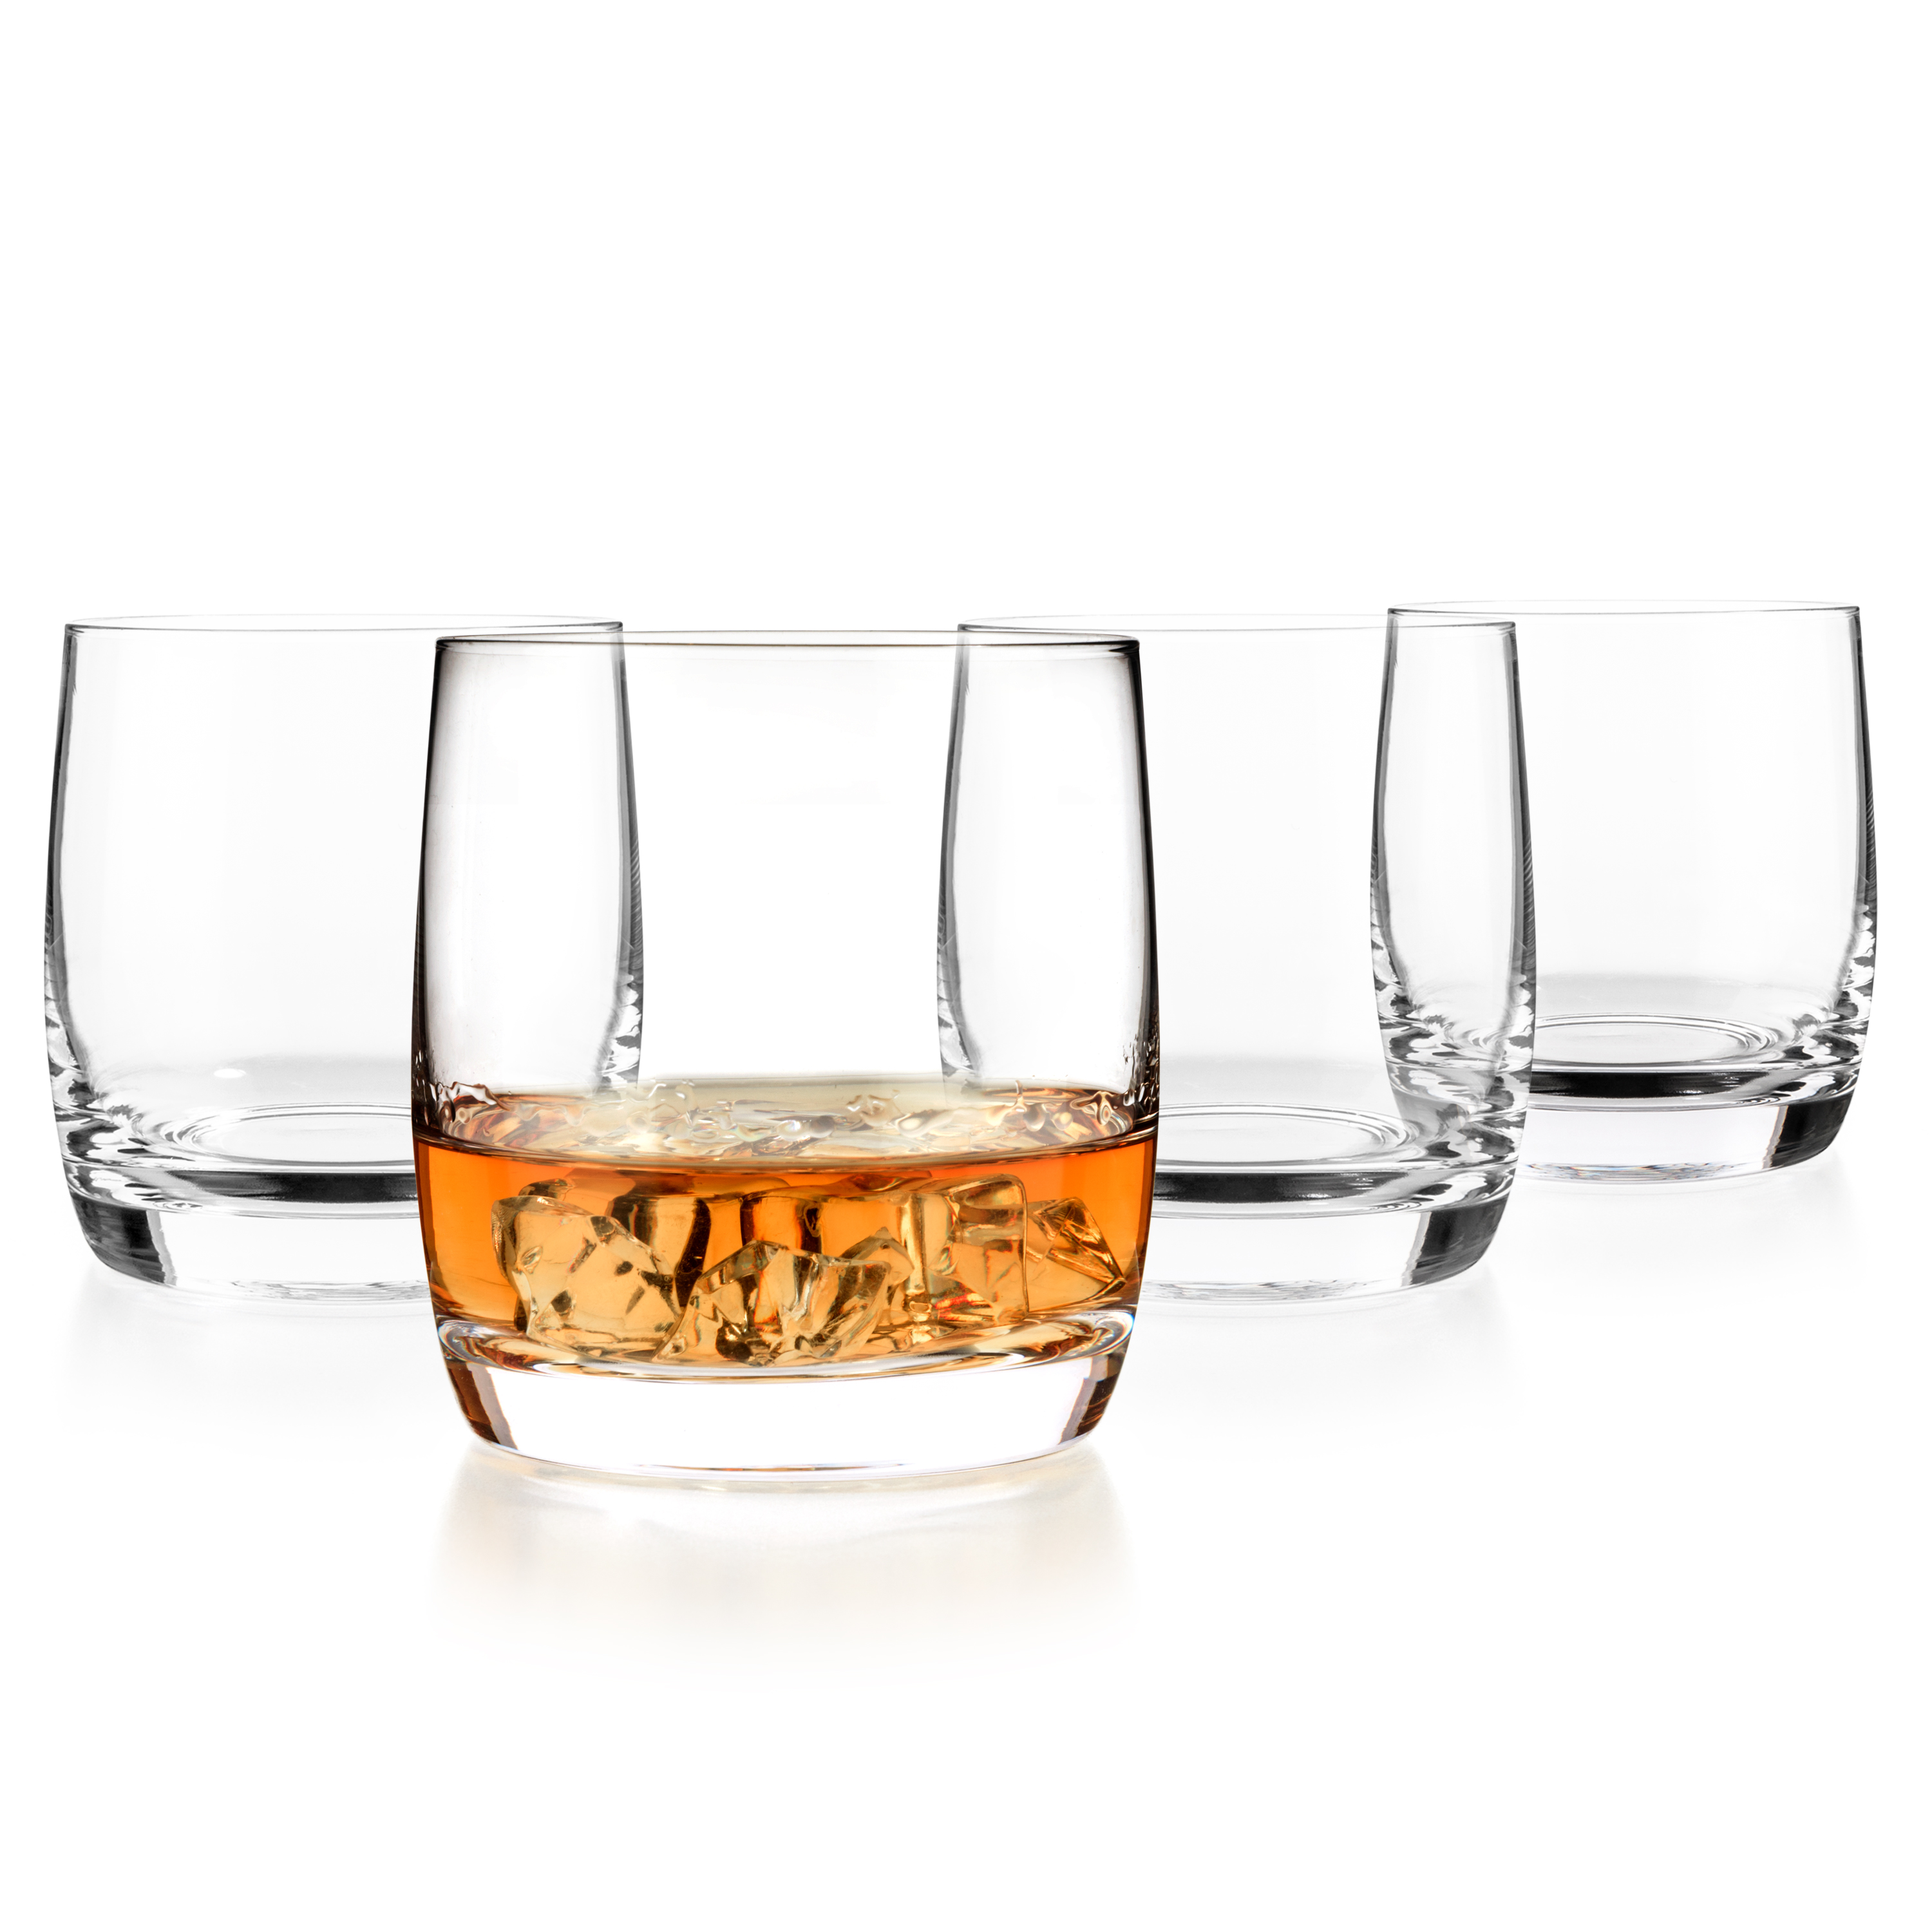 https://www.luxbe.com/images/detailed/4/scotch-and-whiskey-glasses-set-of-2-clone_nxdt-yr.jpg